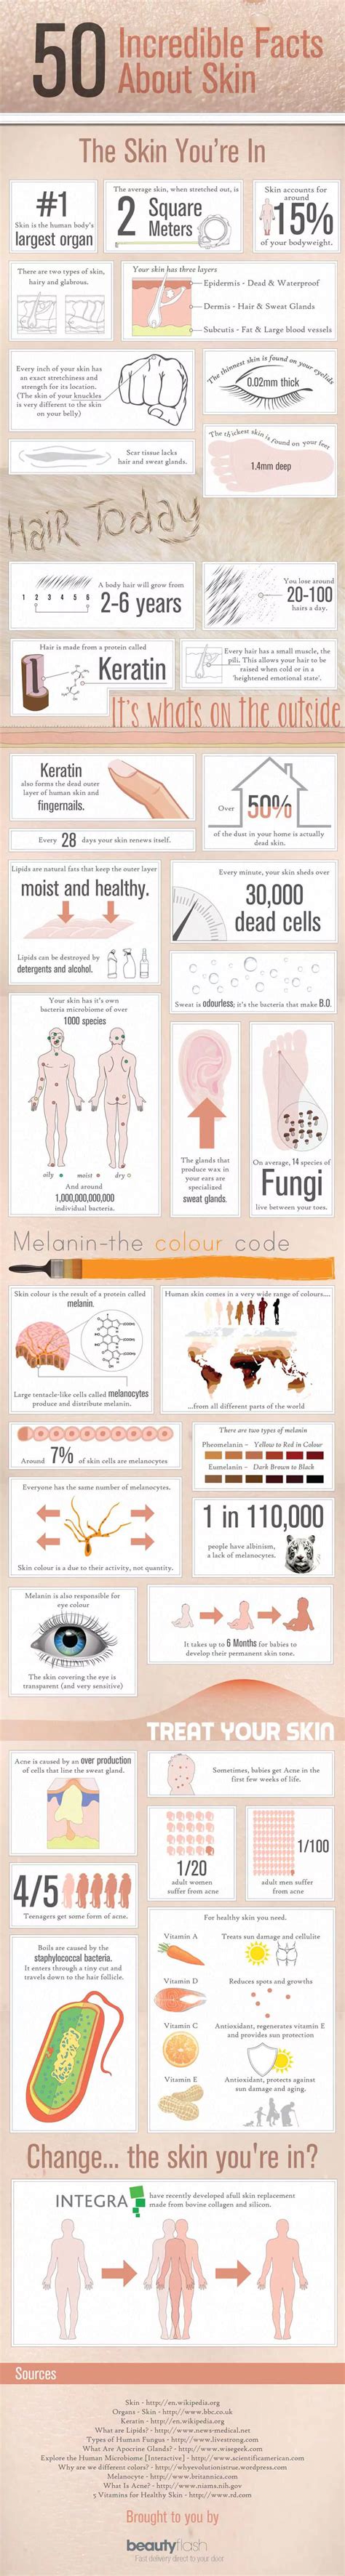 50 Incredible Facts About Skin 46 Health Infographics That You Wish